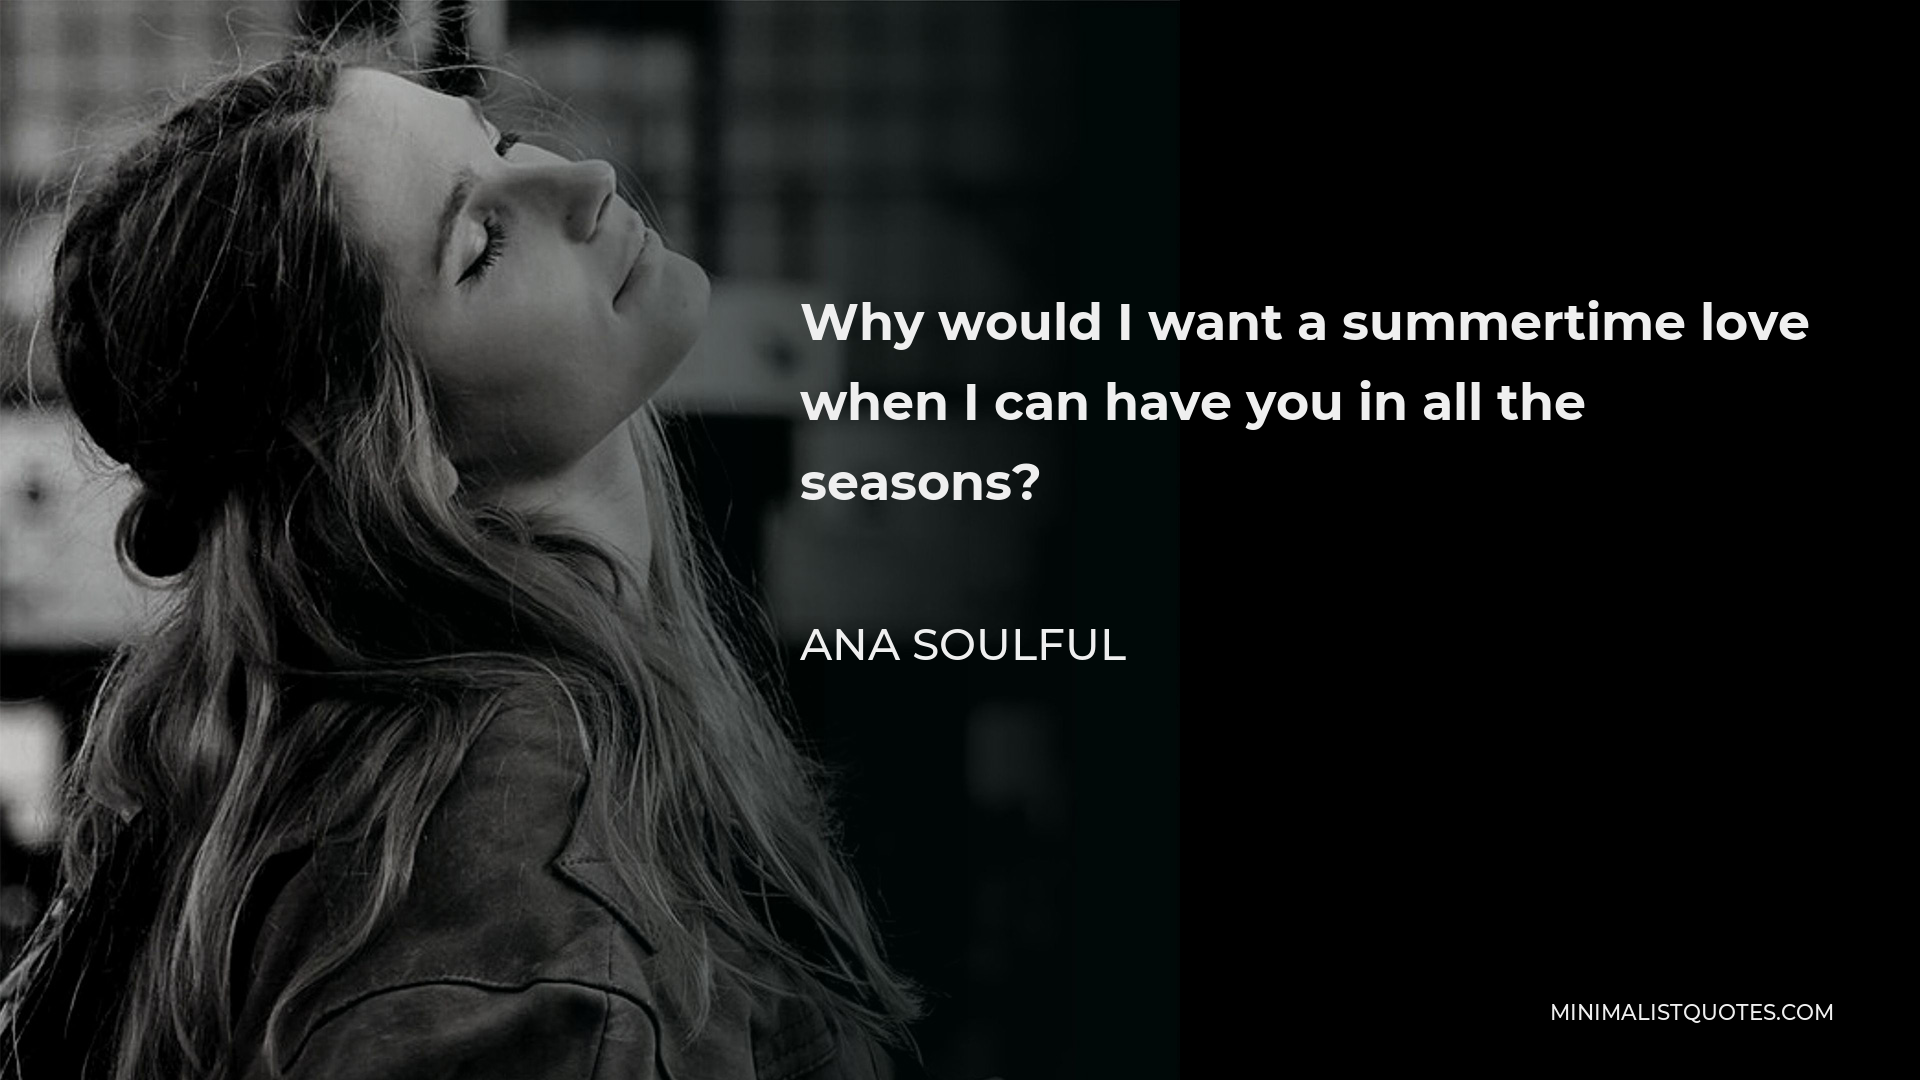 Ana Soulful Quote - Why would I want a summertime love when I can have you in all the seasons?